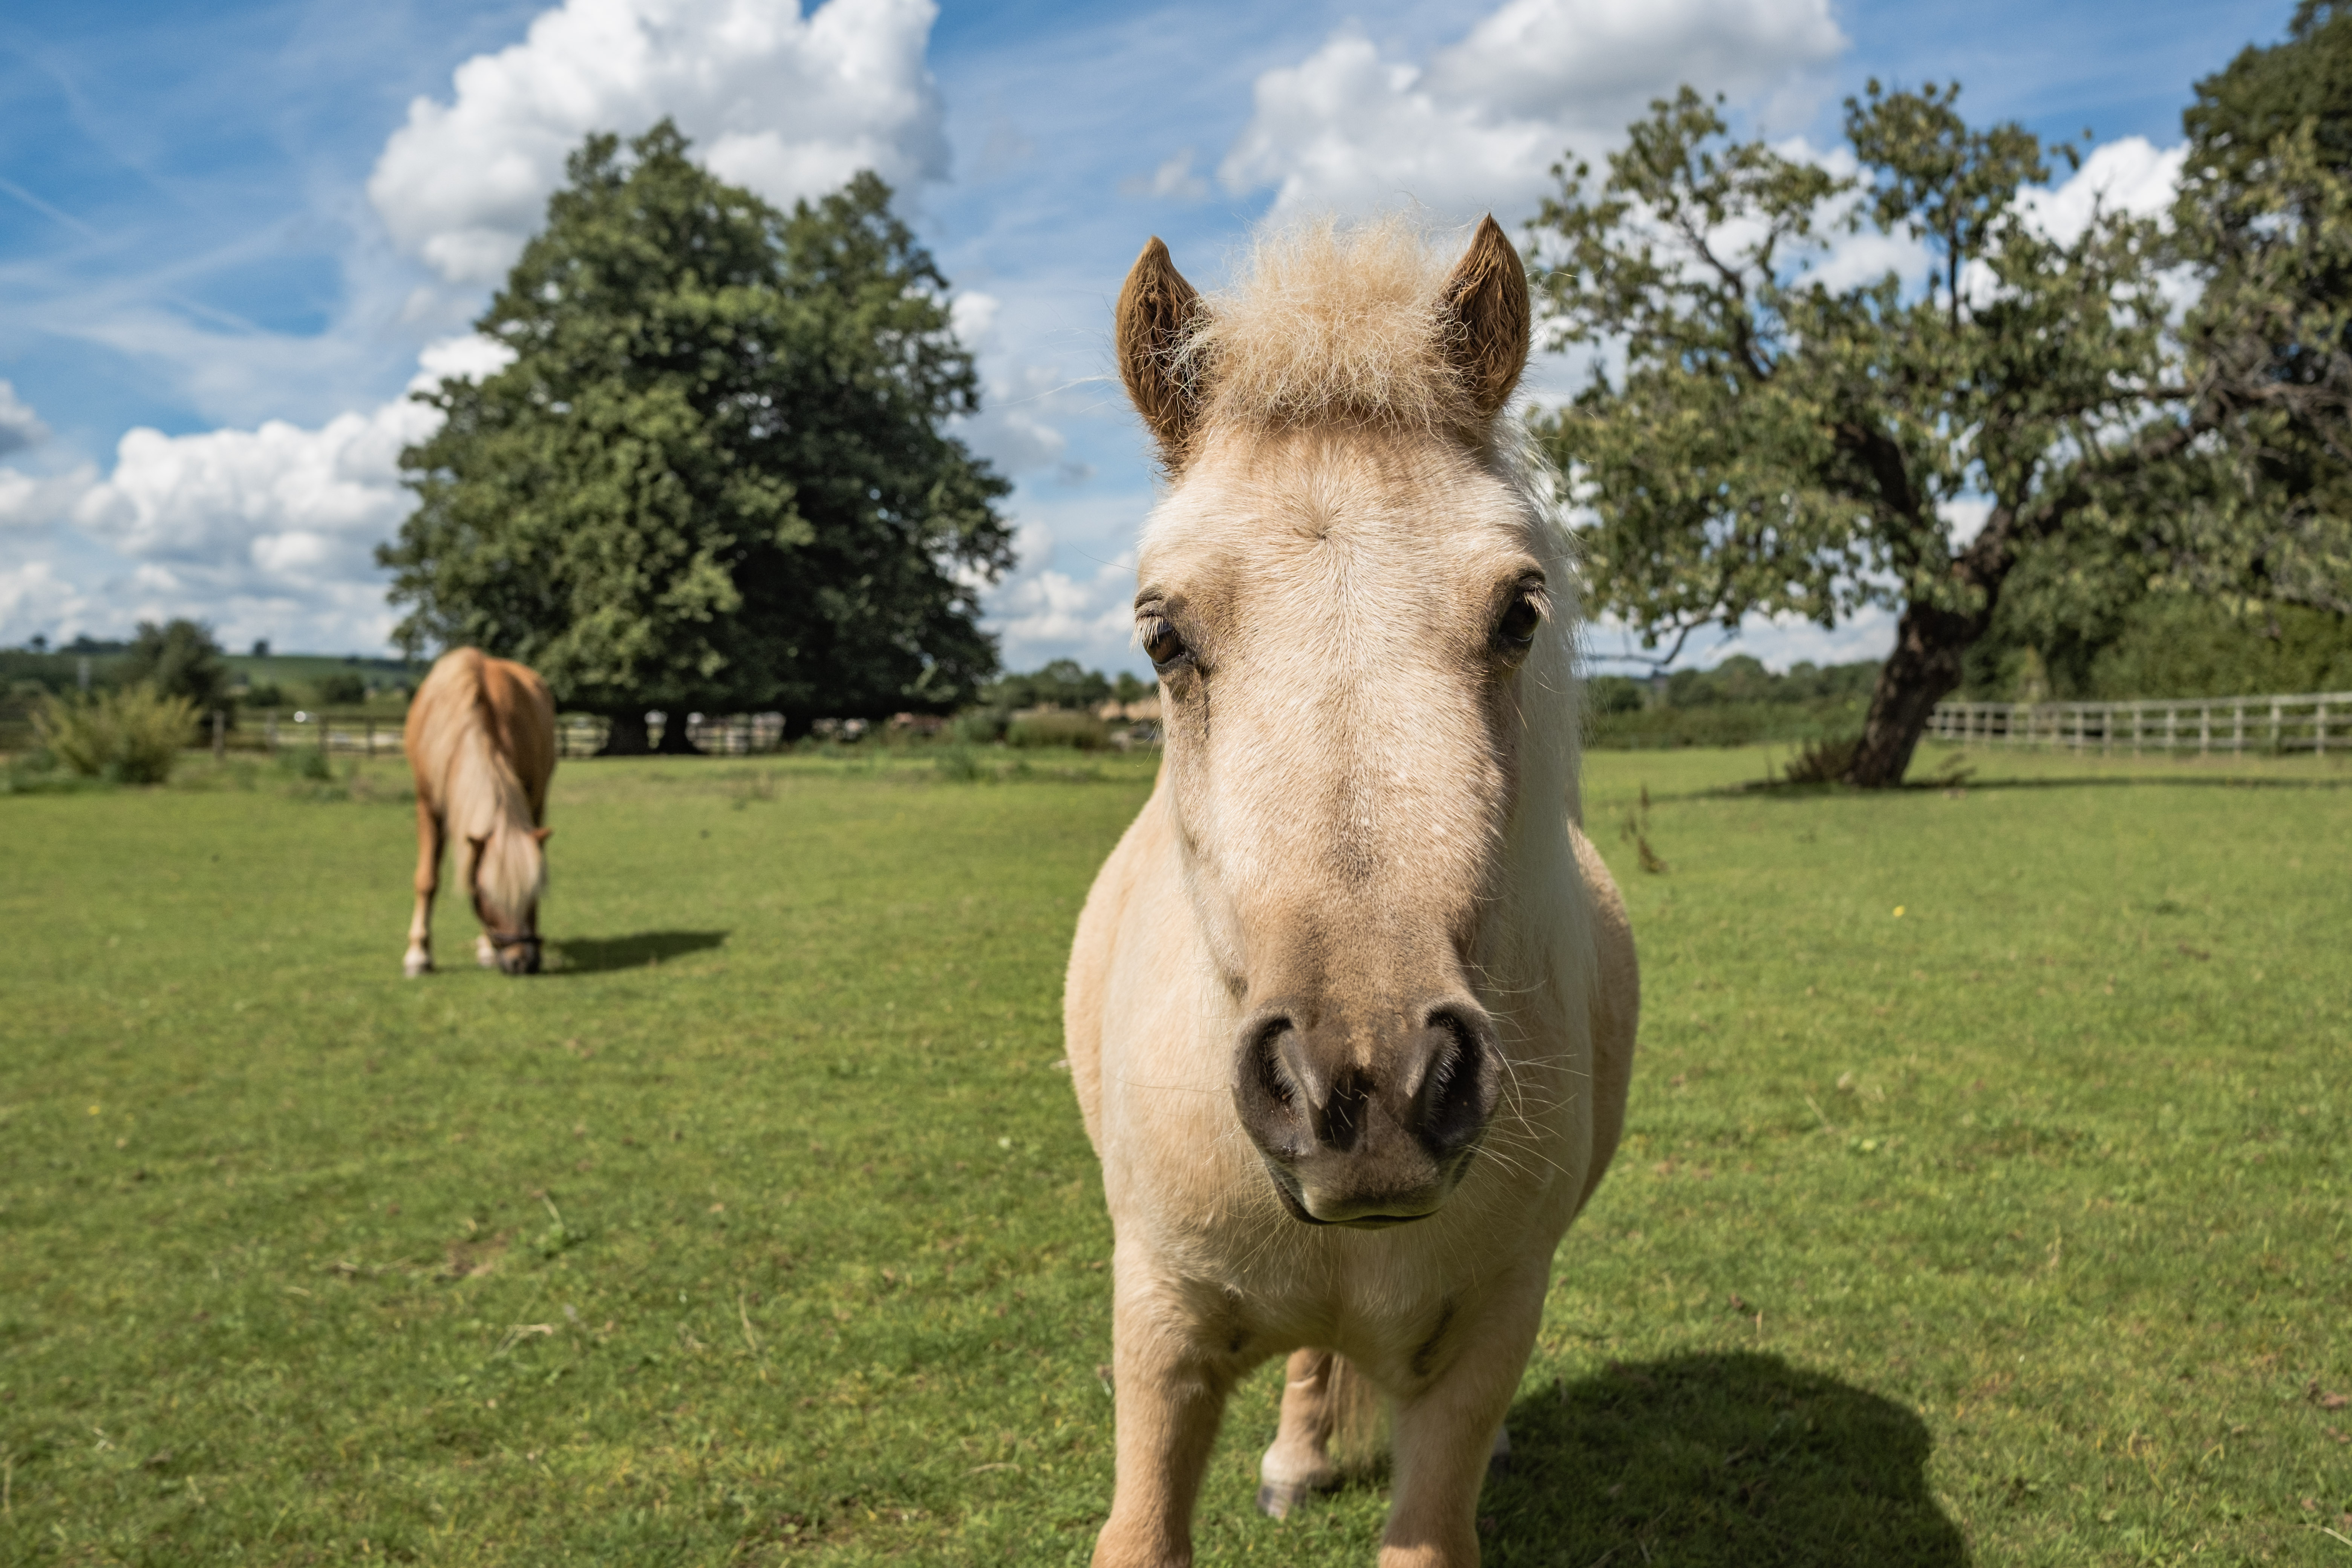 Ears forward and staring into the camera, Megan the golden palomino Shetland pony stands in a field full of green grass